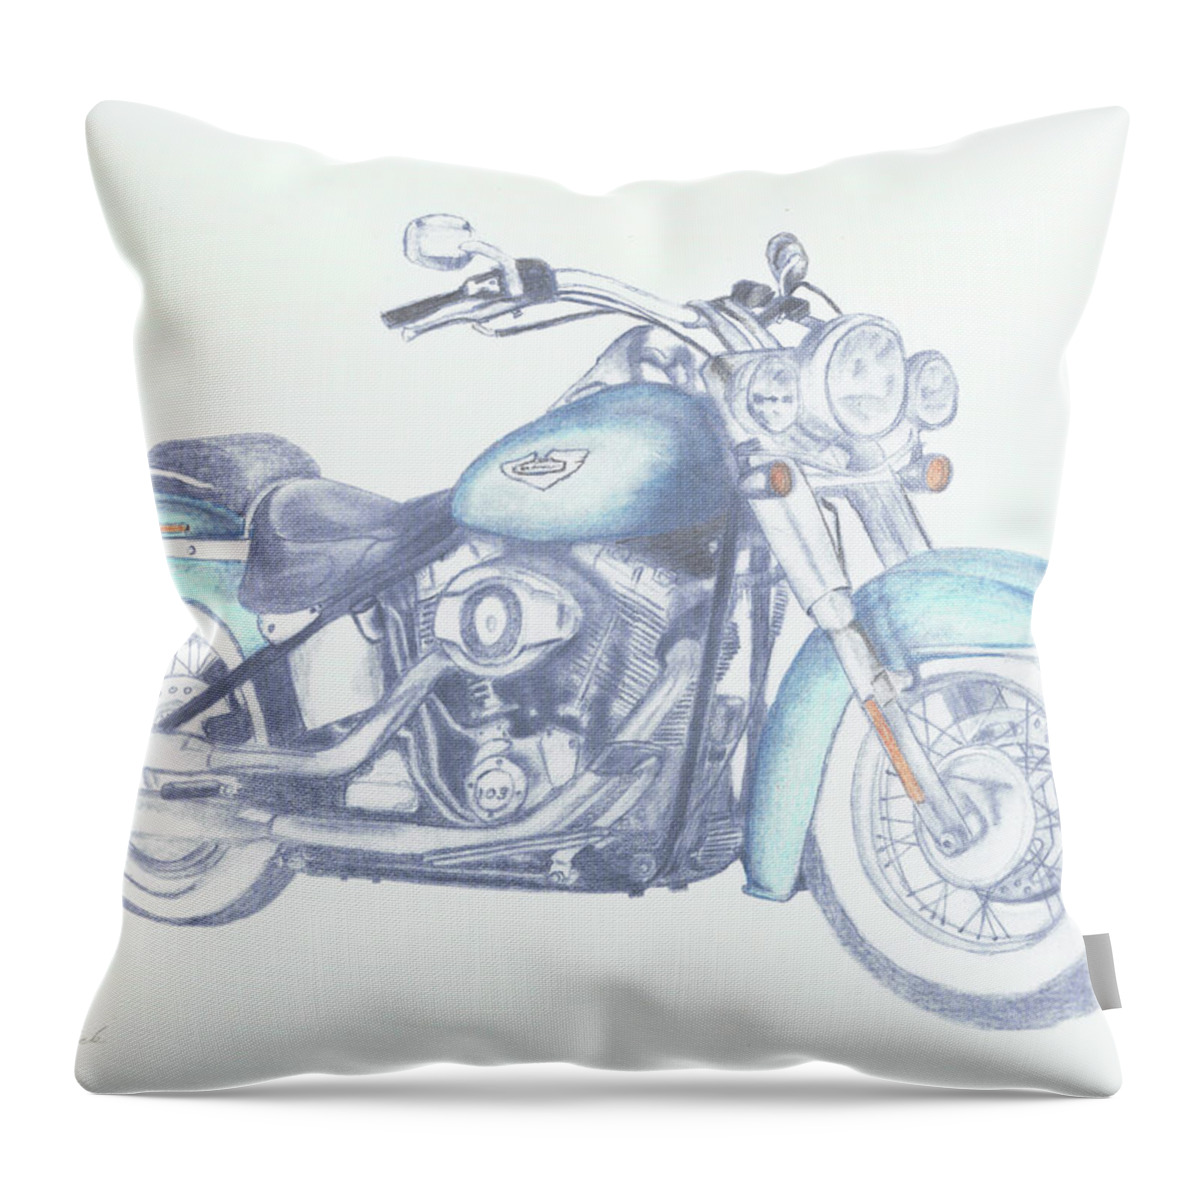 Motorcycle Throw Pillow featuring the drawing 2015 Softail by Terry Frederick